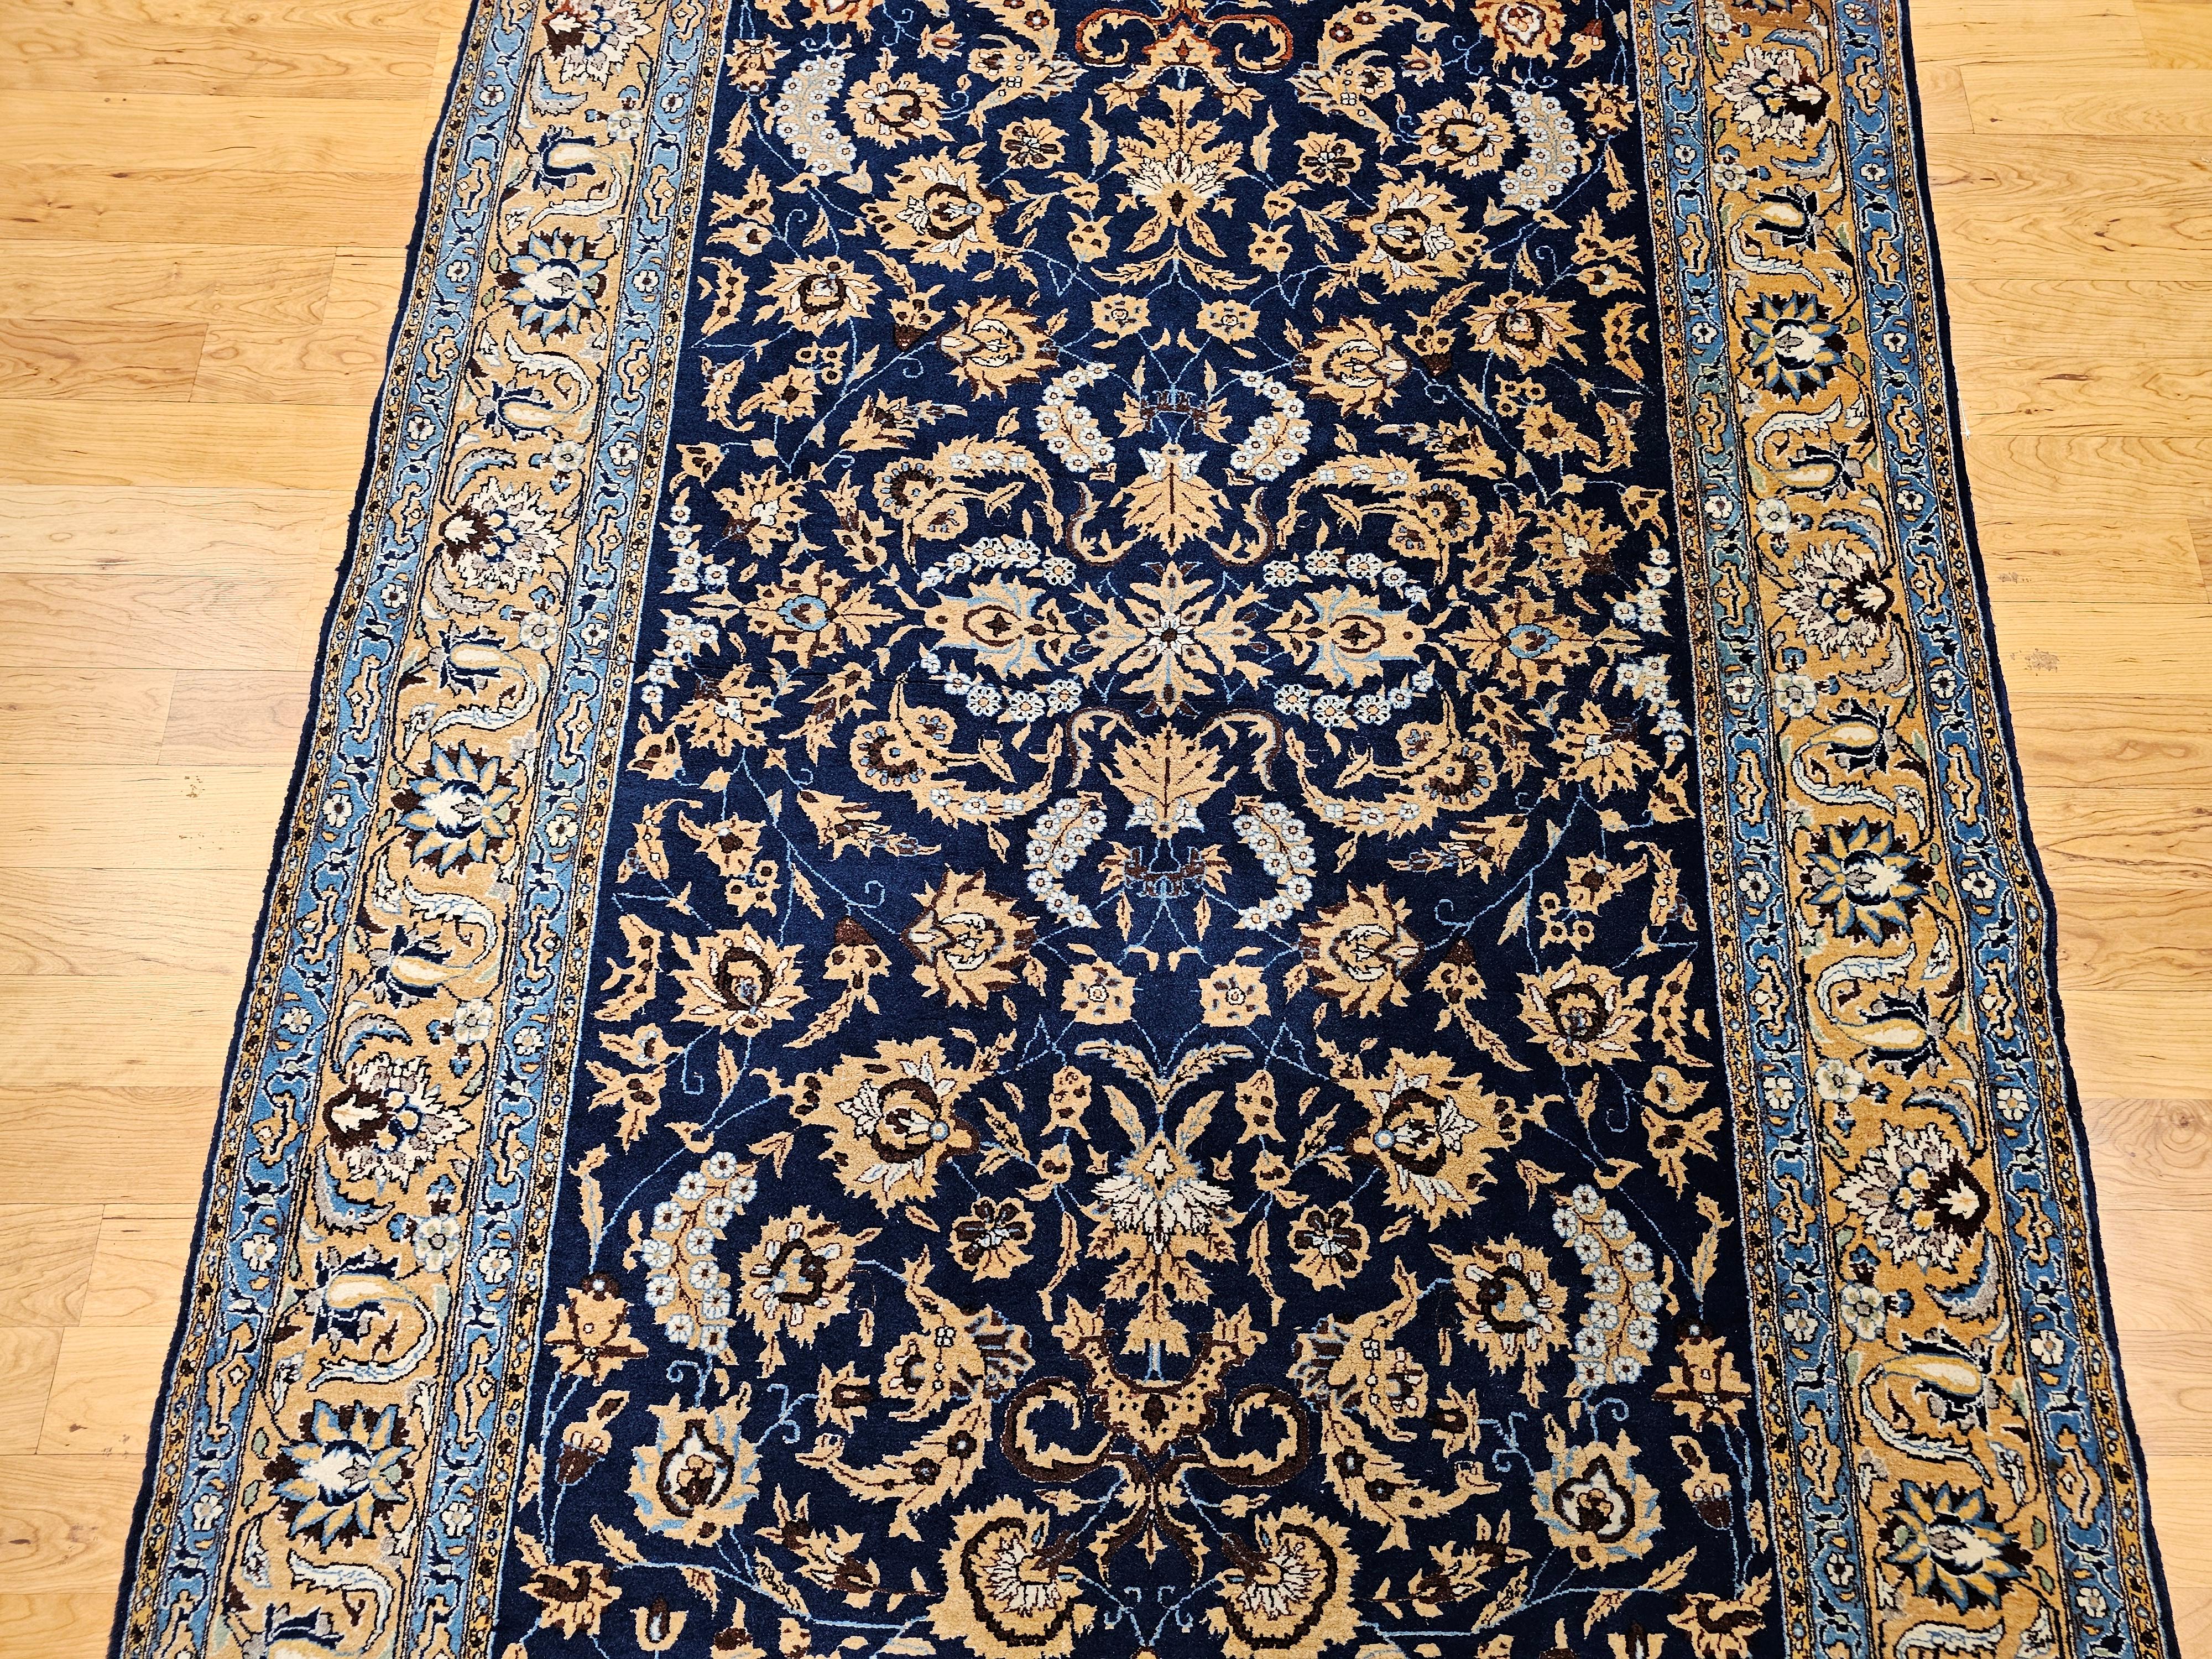 Vintage Persian Tabriz in an Allover Pattern in Navy Blue, Tan, Brown, Baby Blue In Good Condition For Sale In Barrington, IL